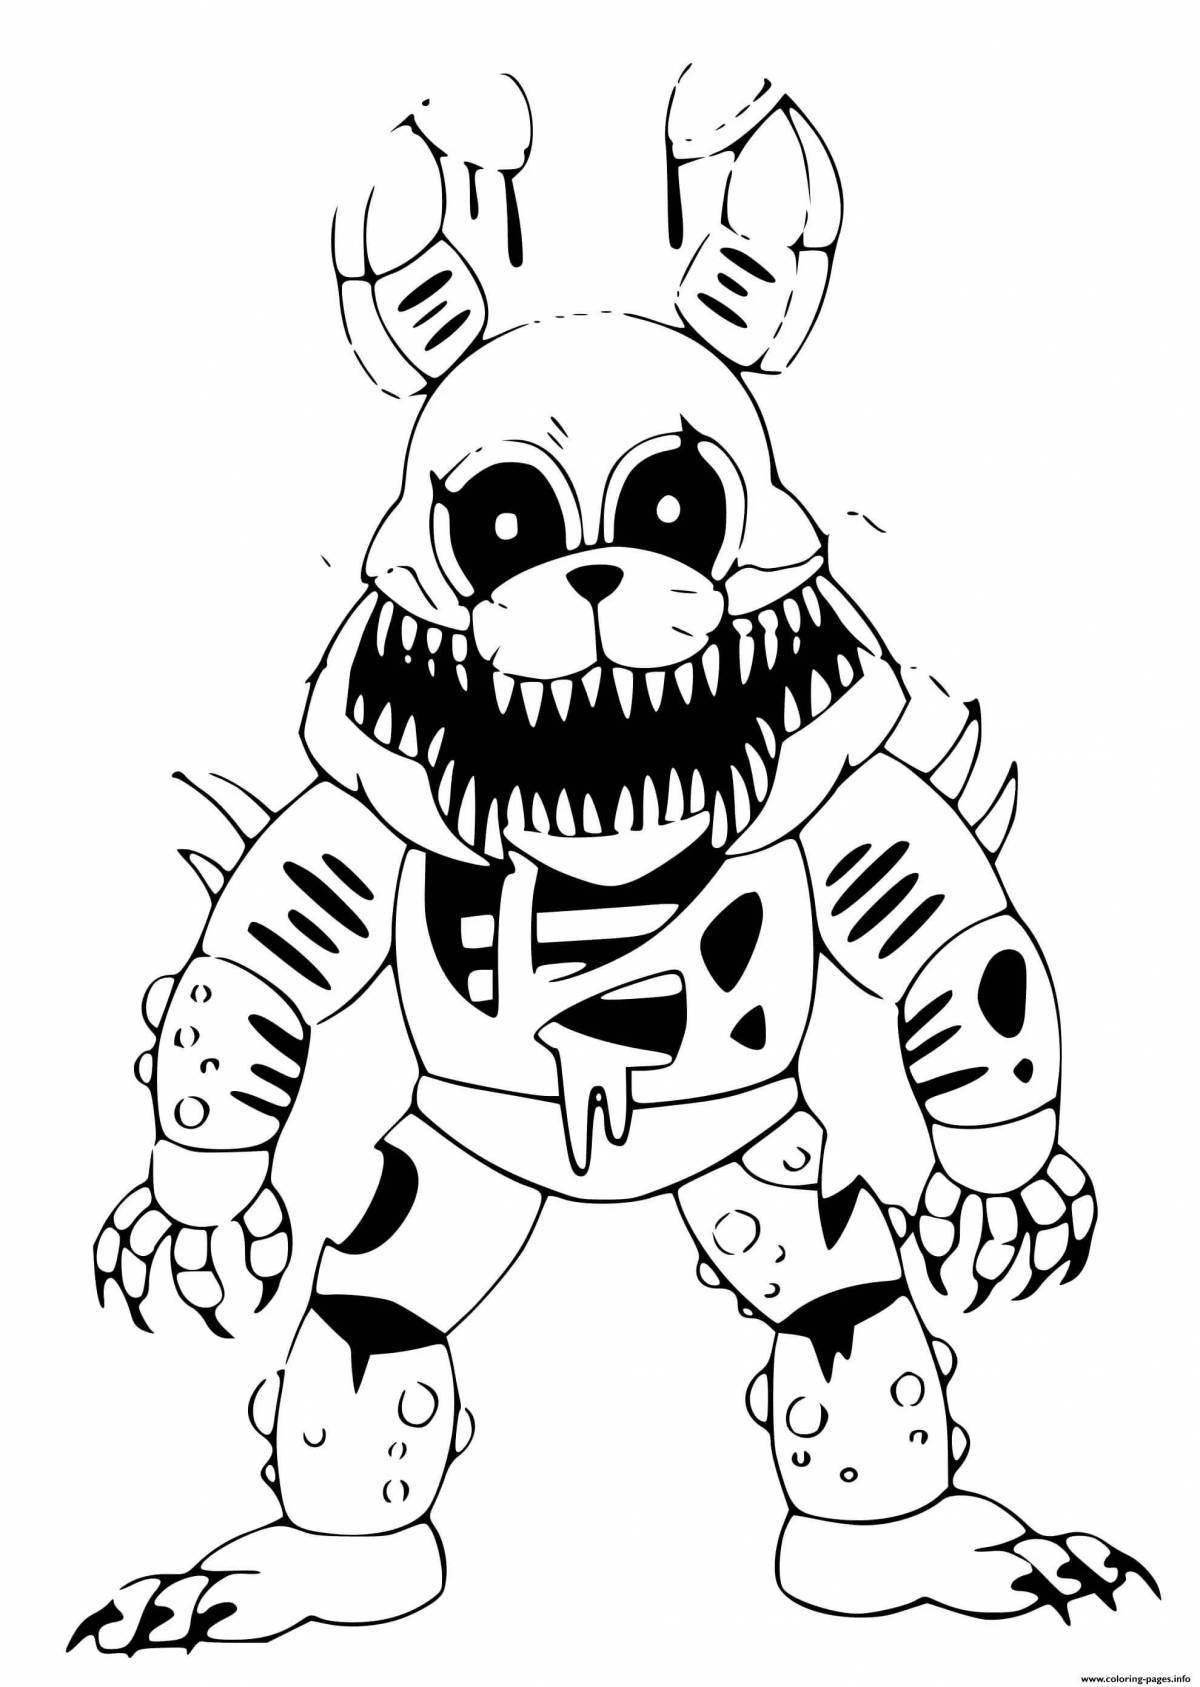 Animatronic ghostly nightmares coloring book